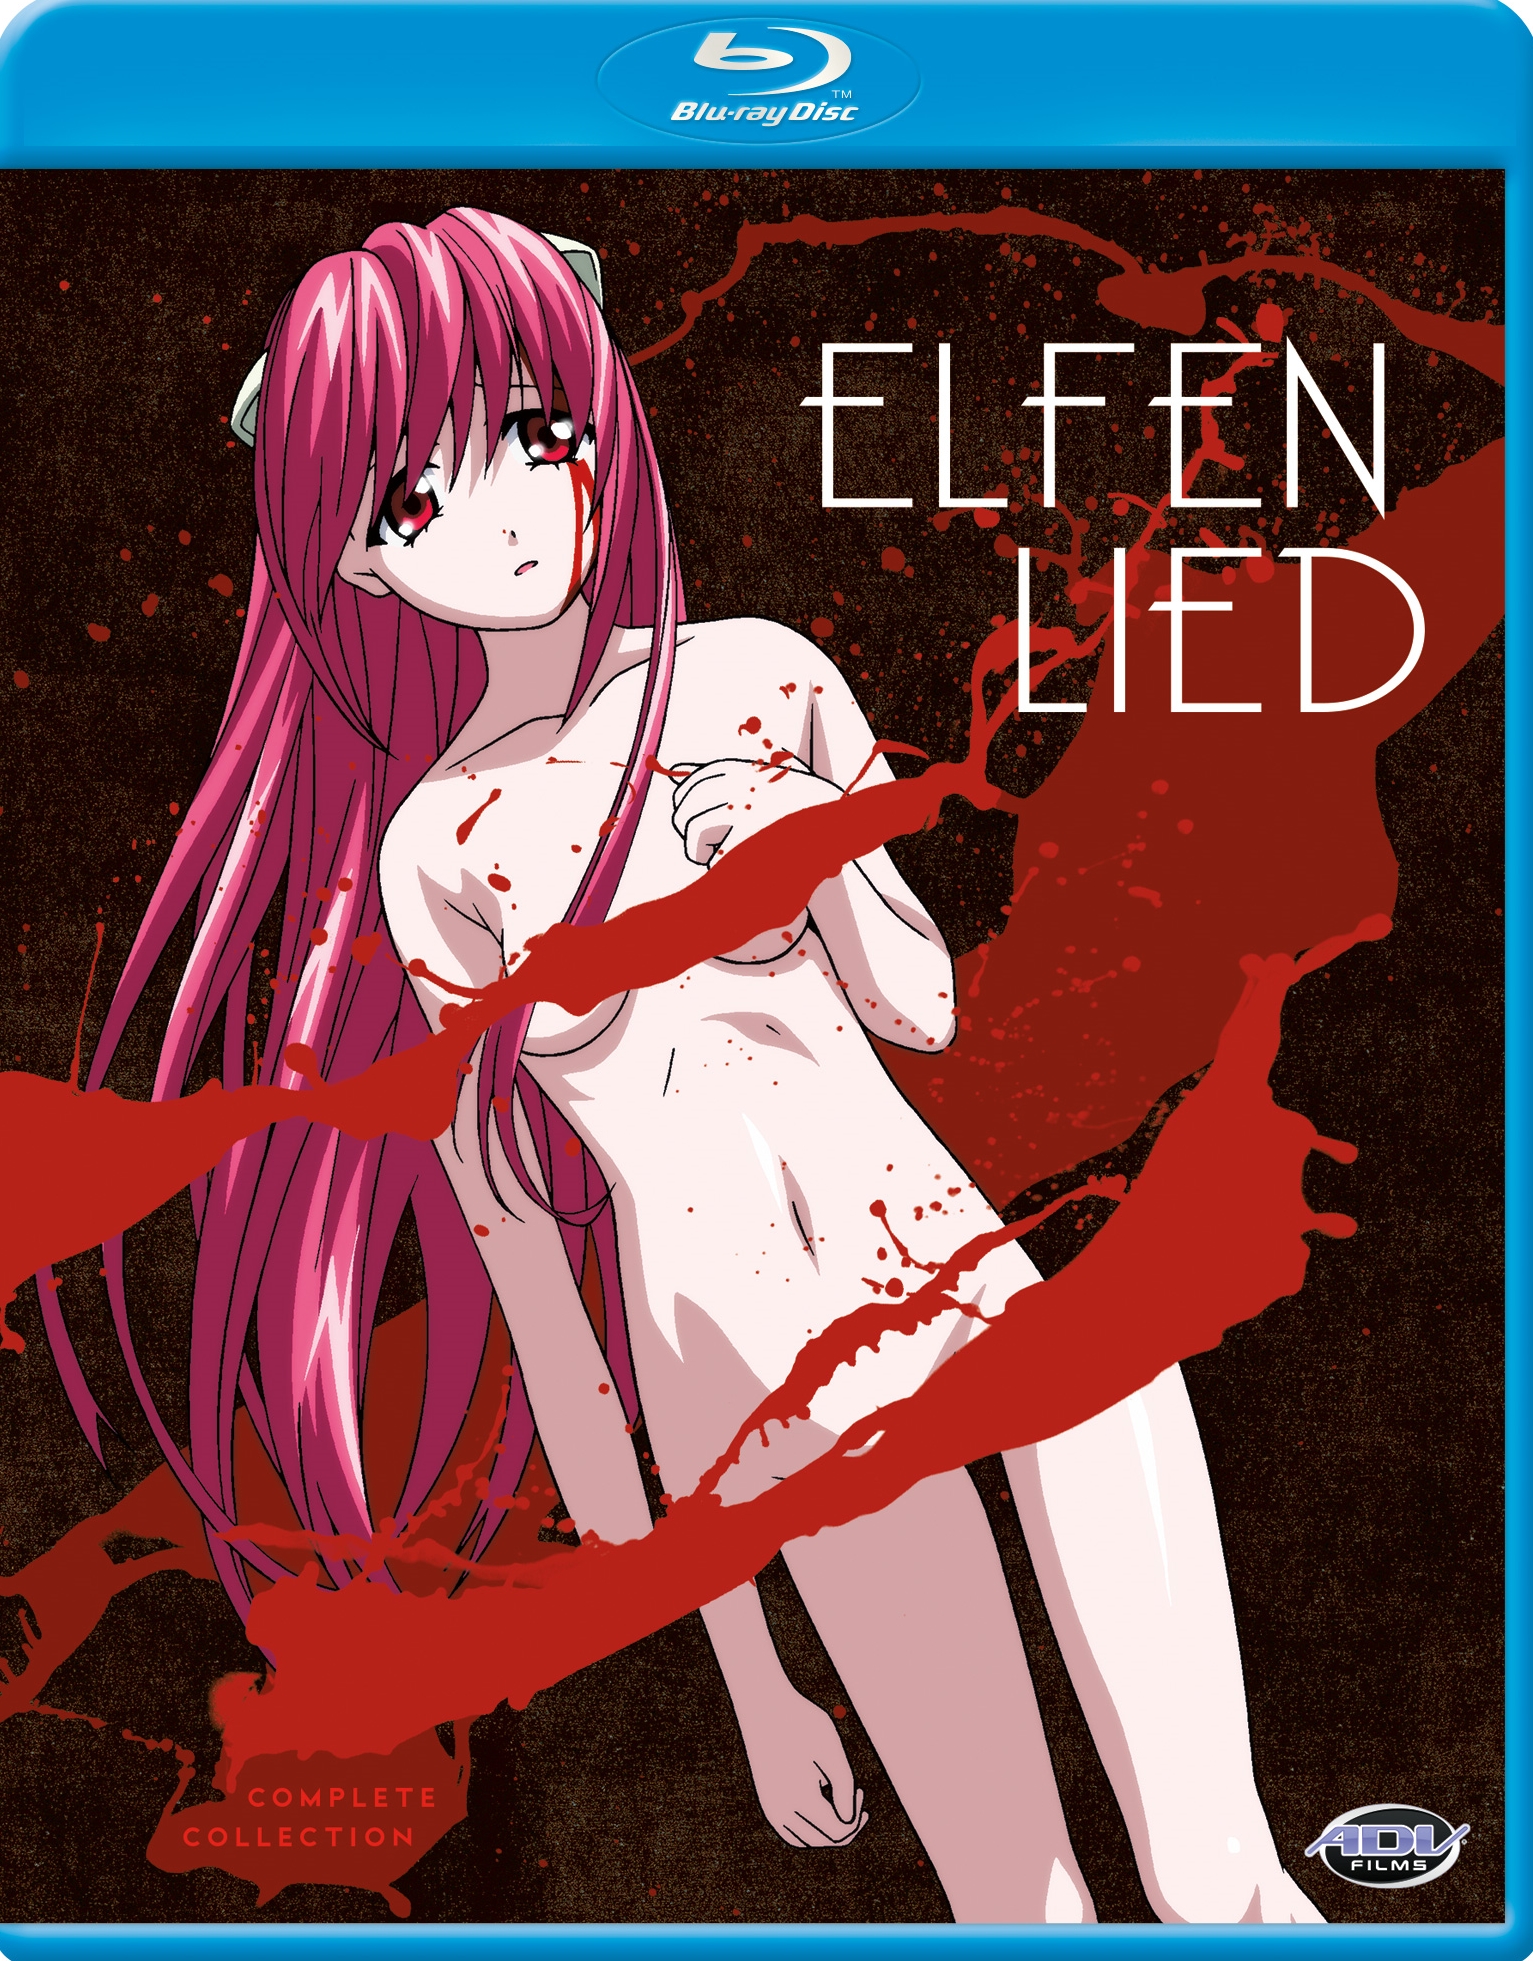 Why is elfen lied so highly rated and popular? (60 - ) - Forums 